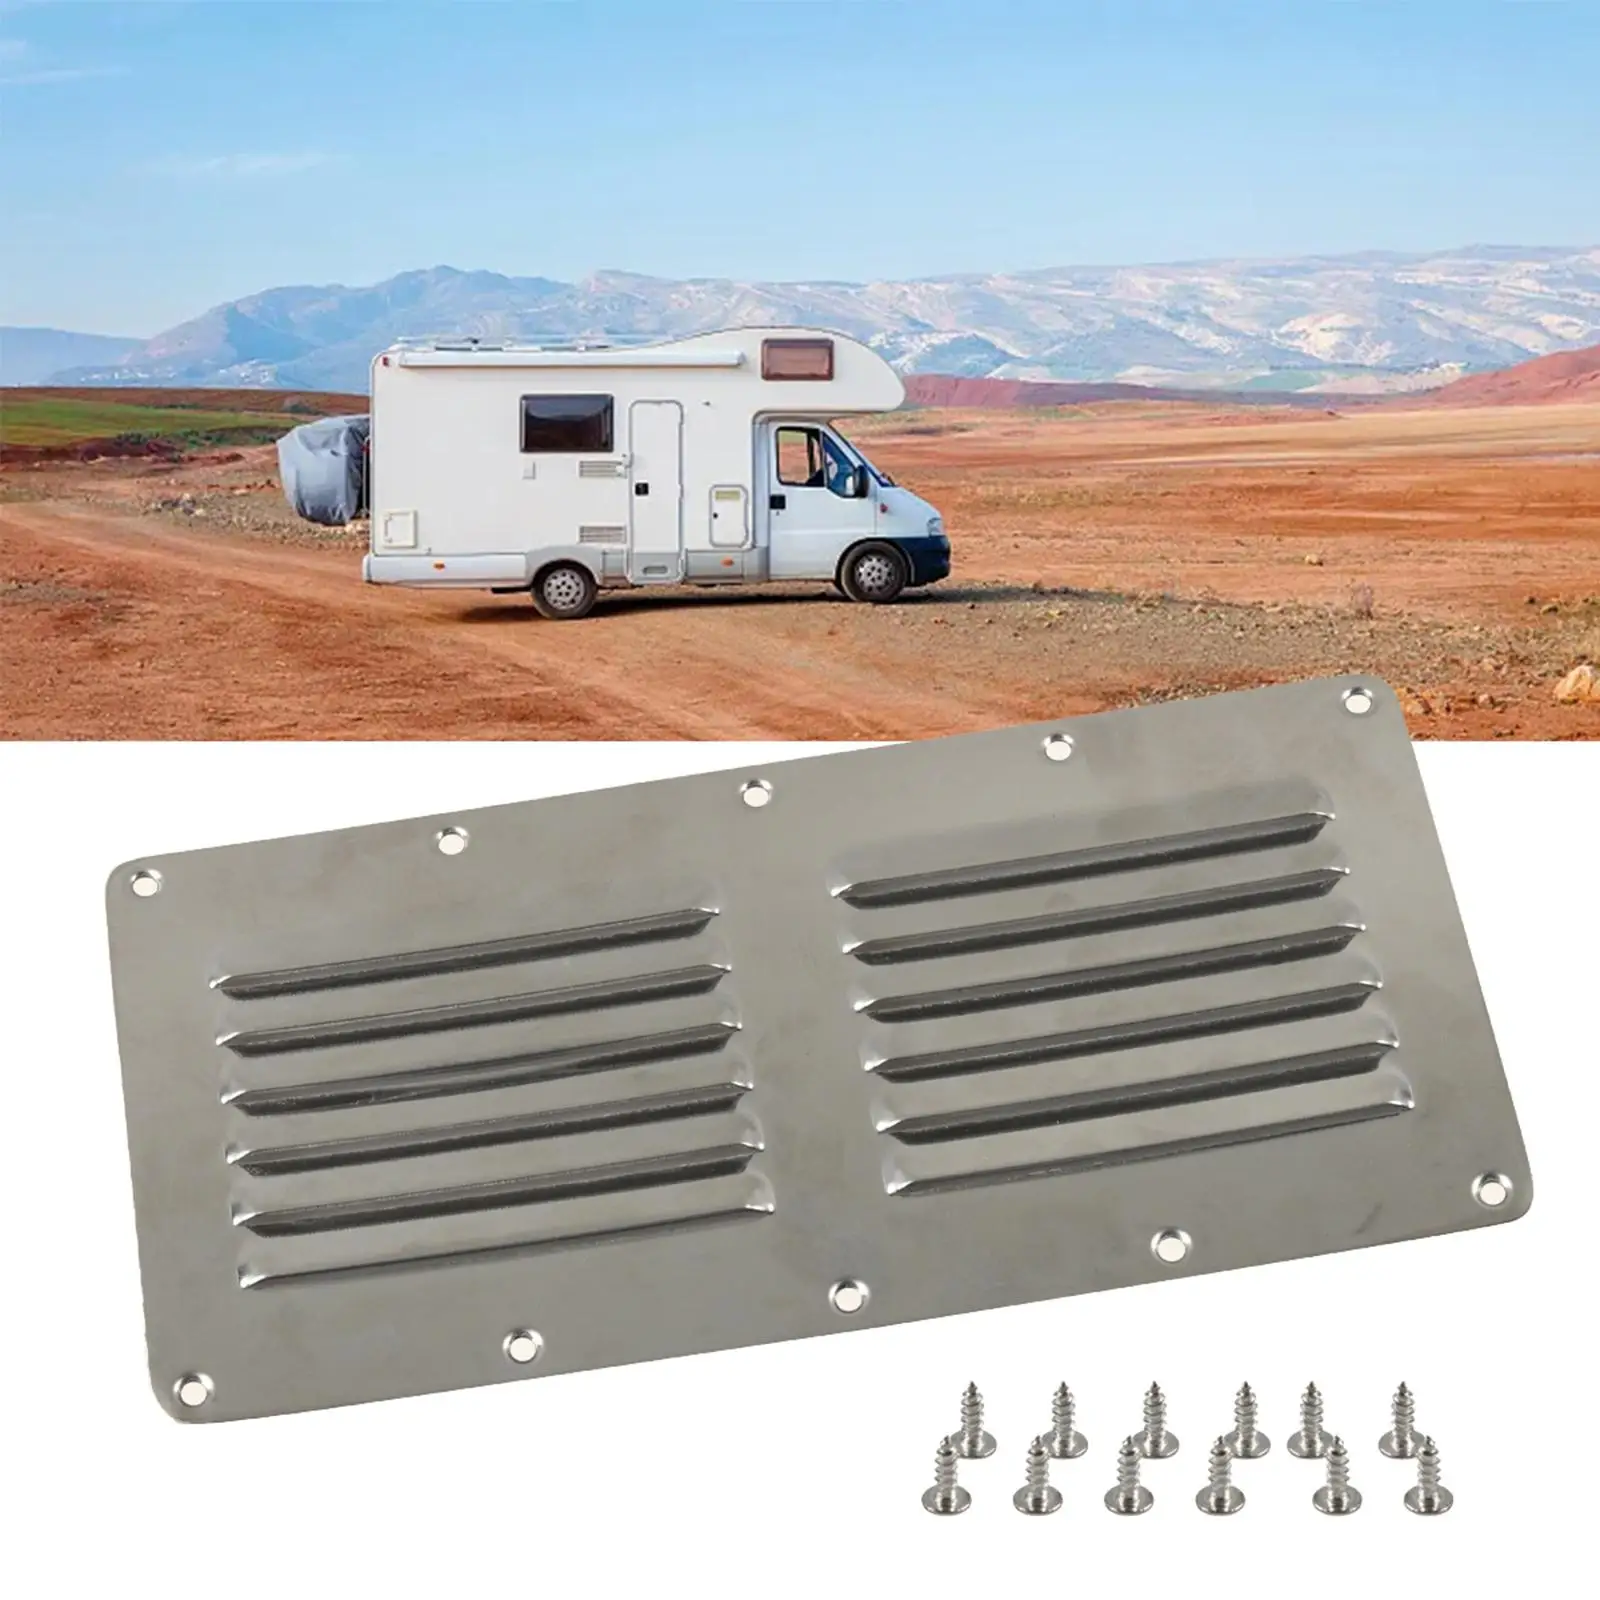 Marine Marine Vent Attachment Durable Replacement 304 Stainless Steel Accessories for Hardware Fitting Marine RV Caravan Boat